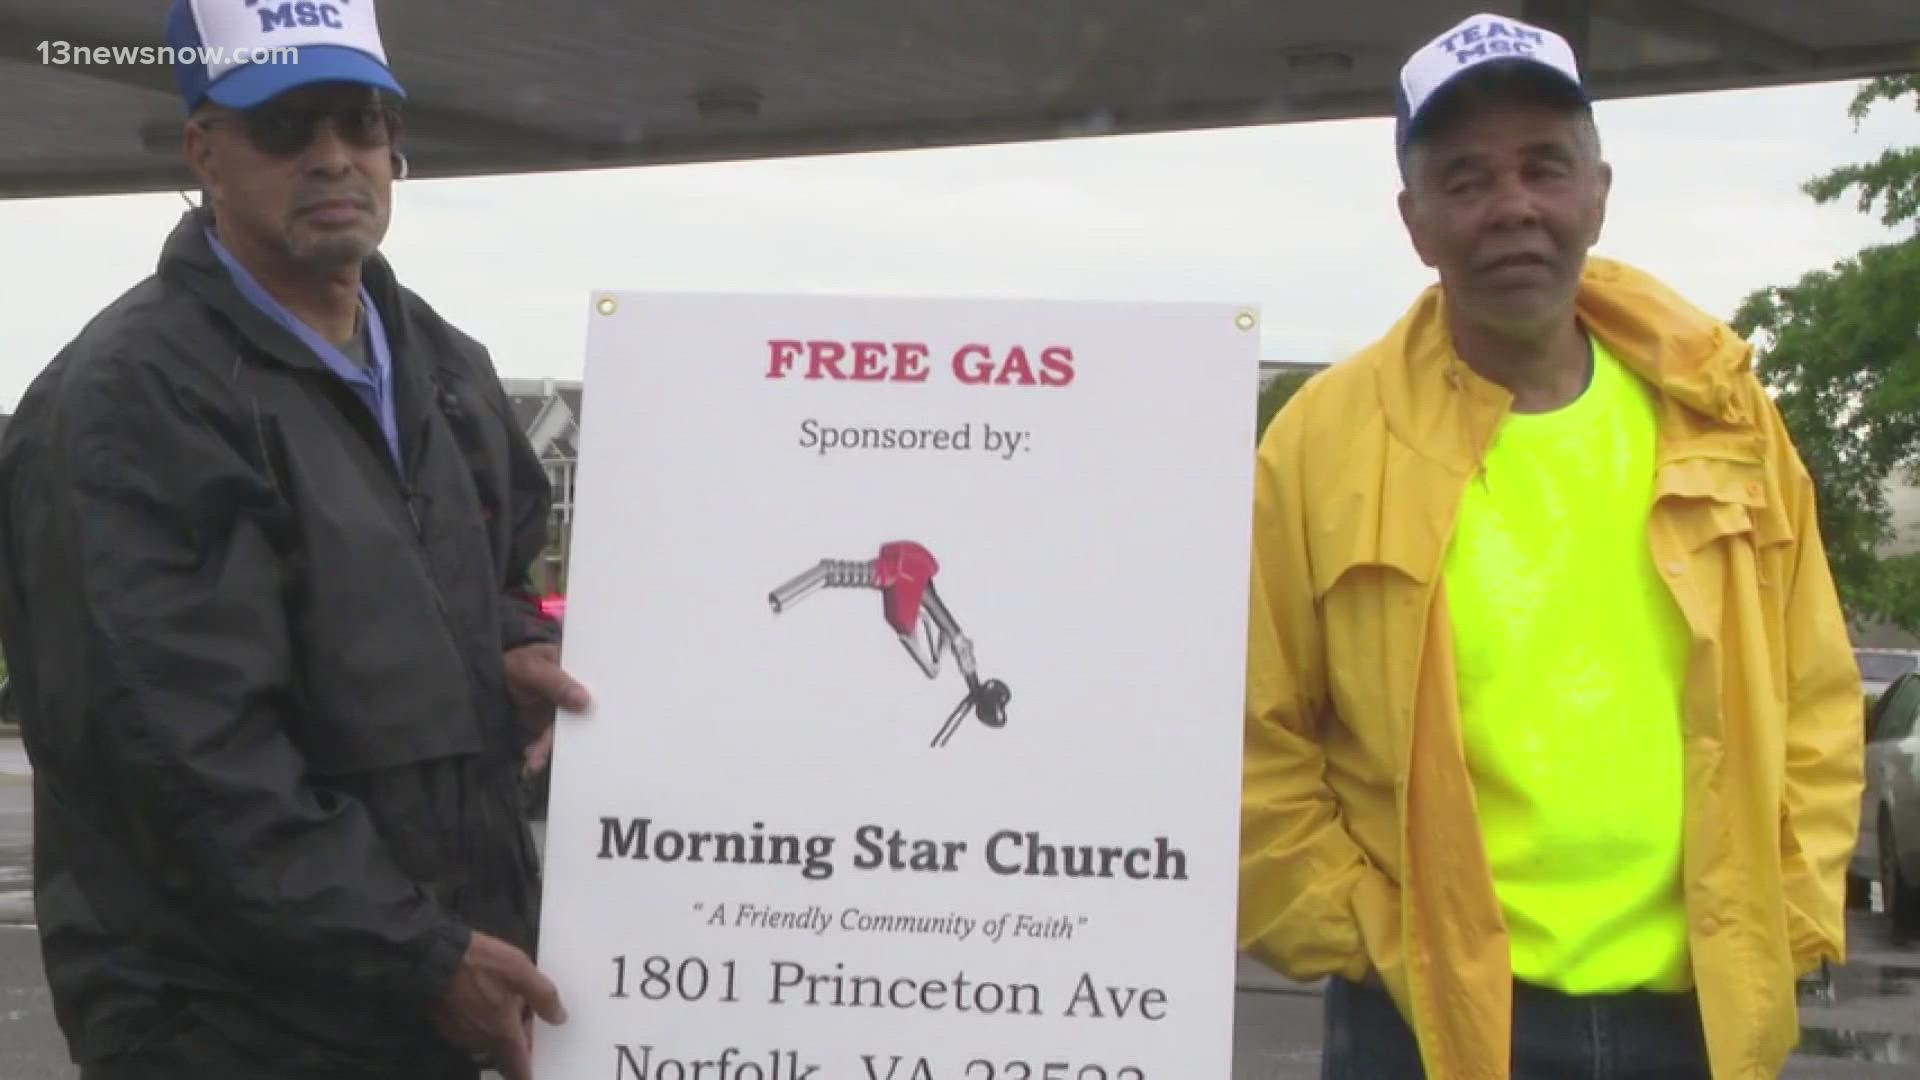 According to event organizers, the back-up became a "safety concern," but drivers still got a voucher for free gasoline.